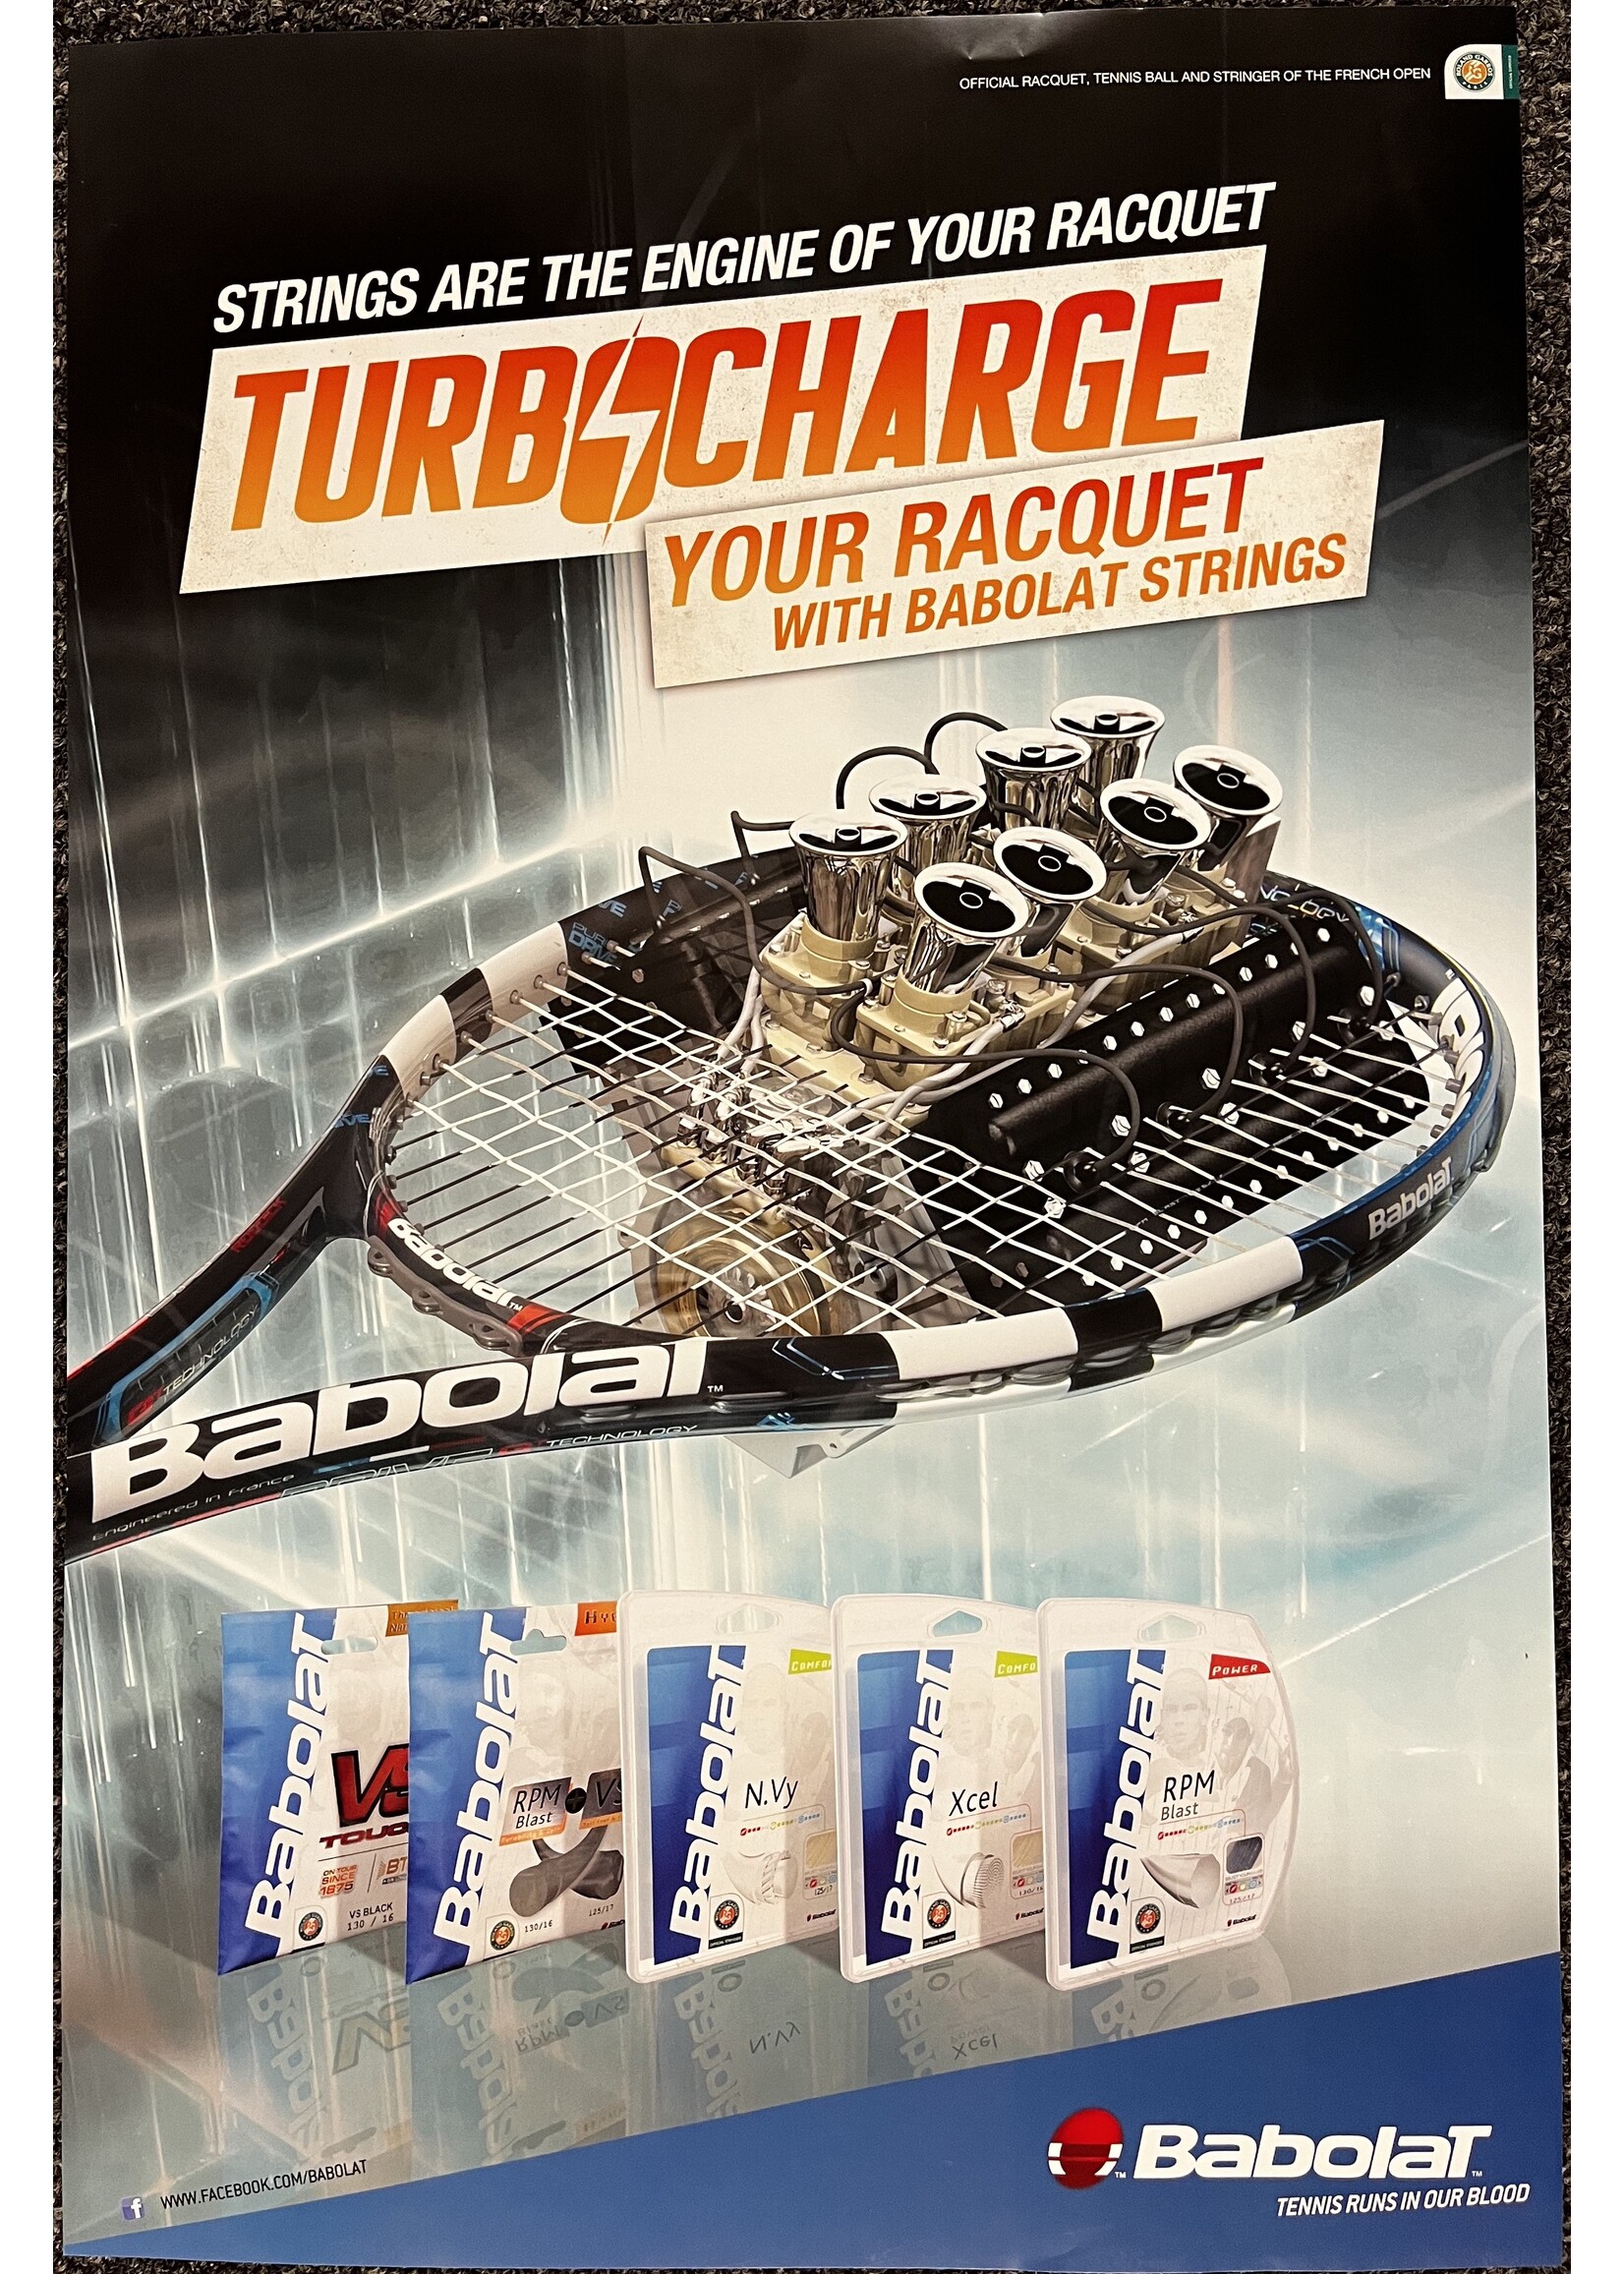 Babolat Poster: Turbo Charge Strings